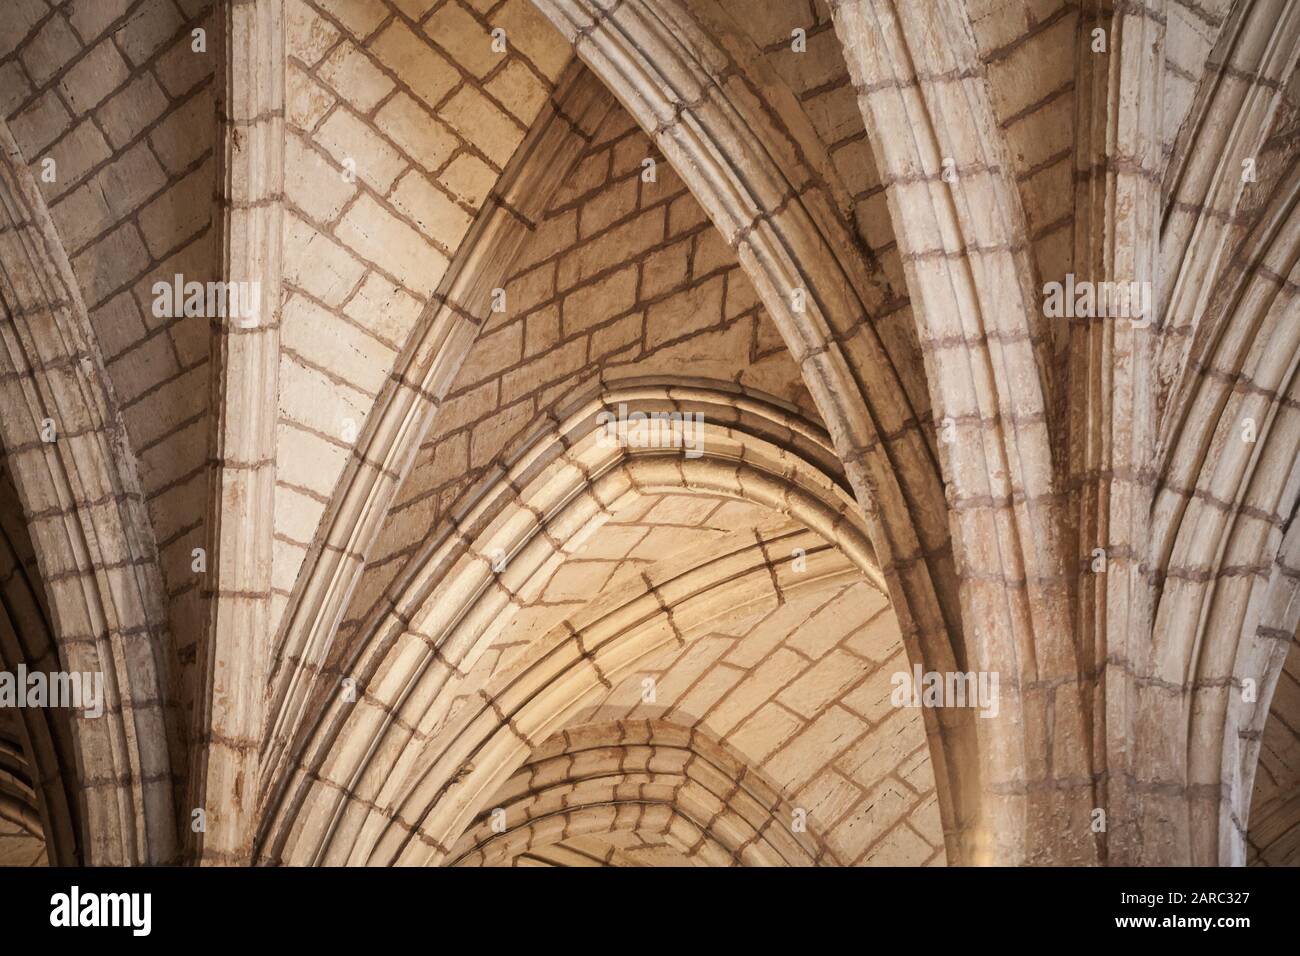 Classic Gothic arched vault structure, abstract architectural background photo Stock Photo